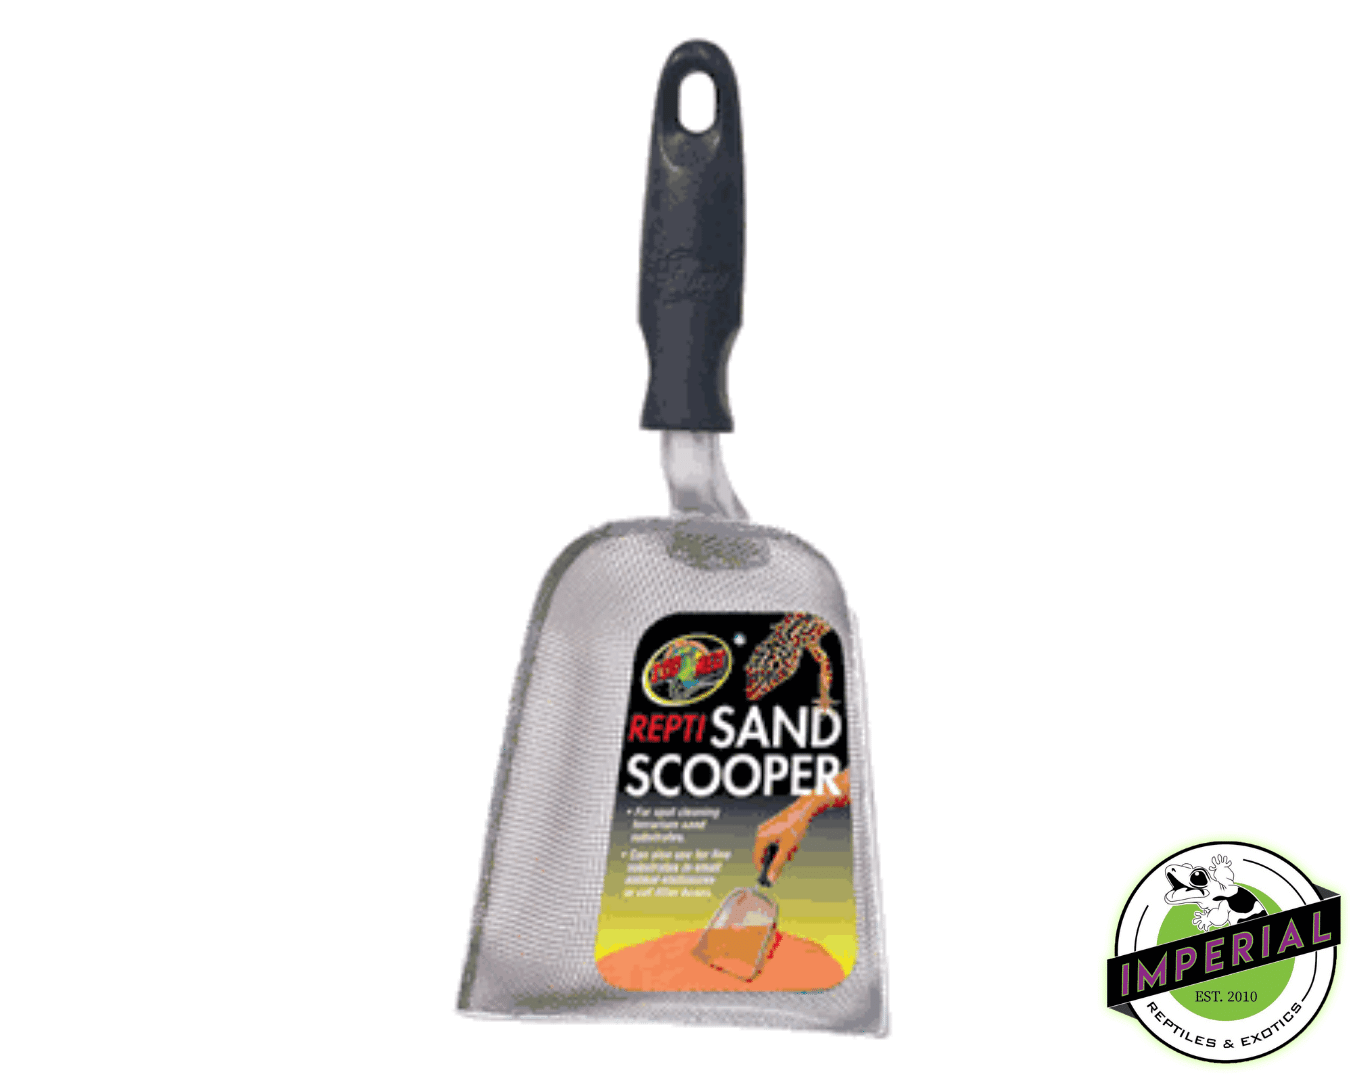 reptile sand scooper to spot clean reptile tanks. buy reptile cleaning tools online at cheap prices